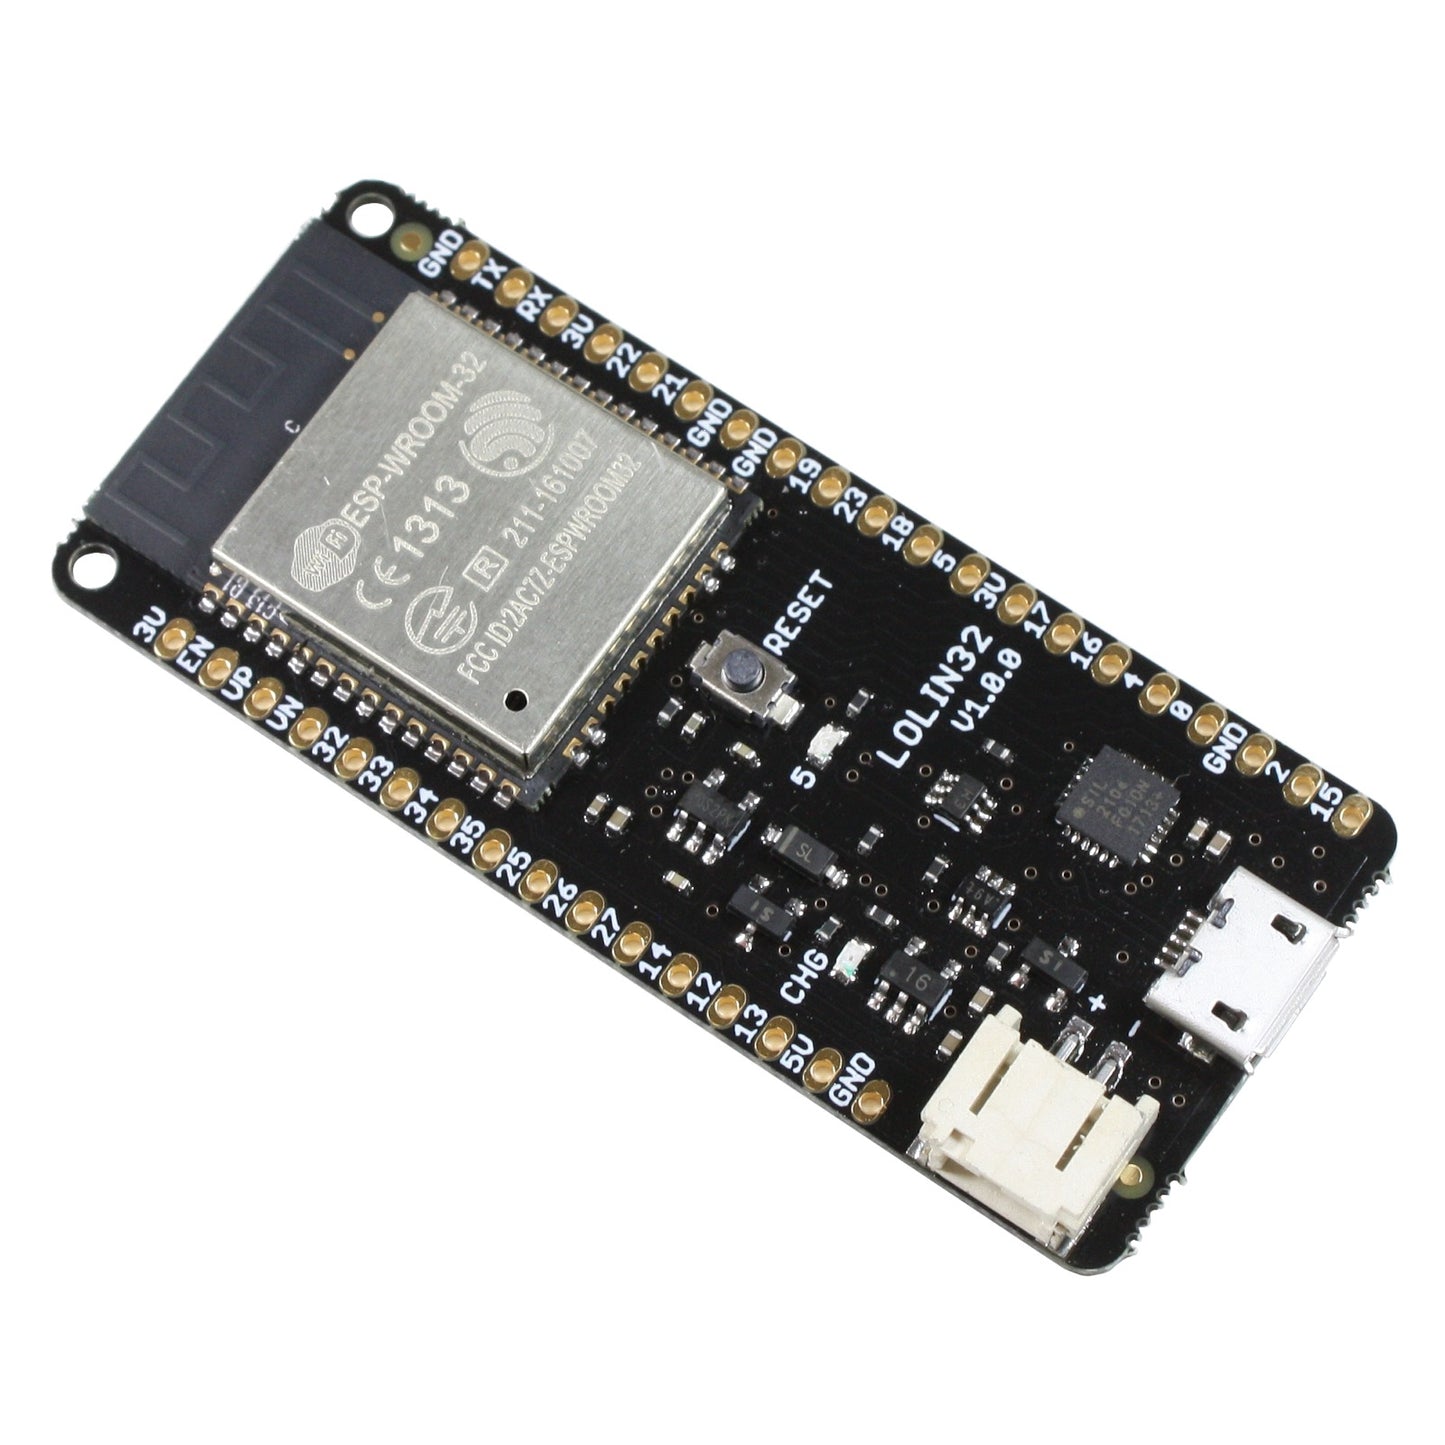 LOLIN32 with ESP32, WiFi, Bluetooth / BLE